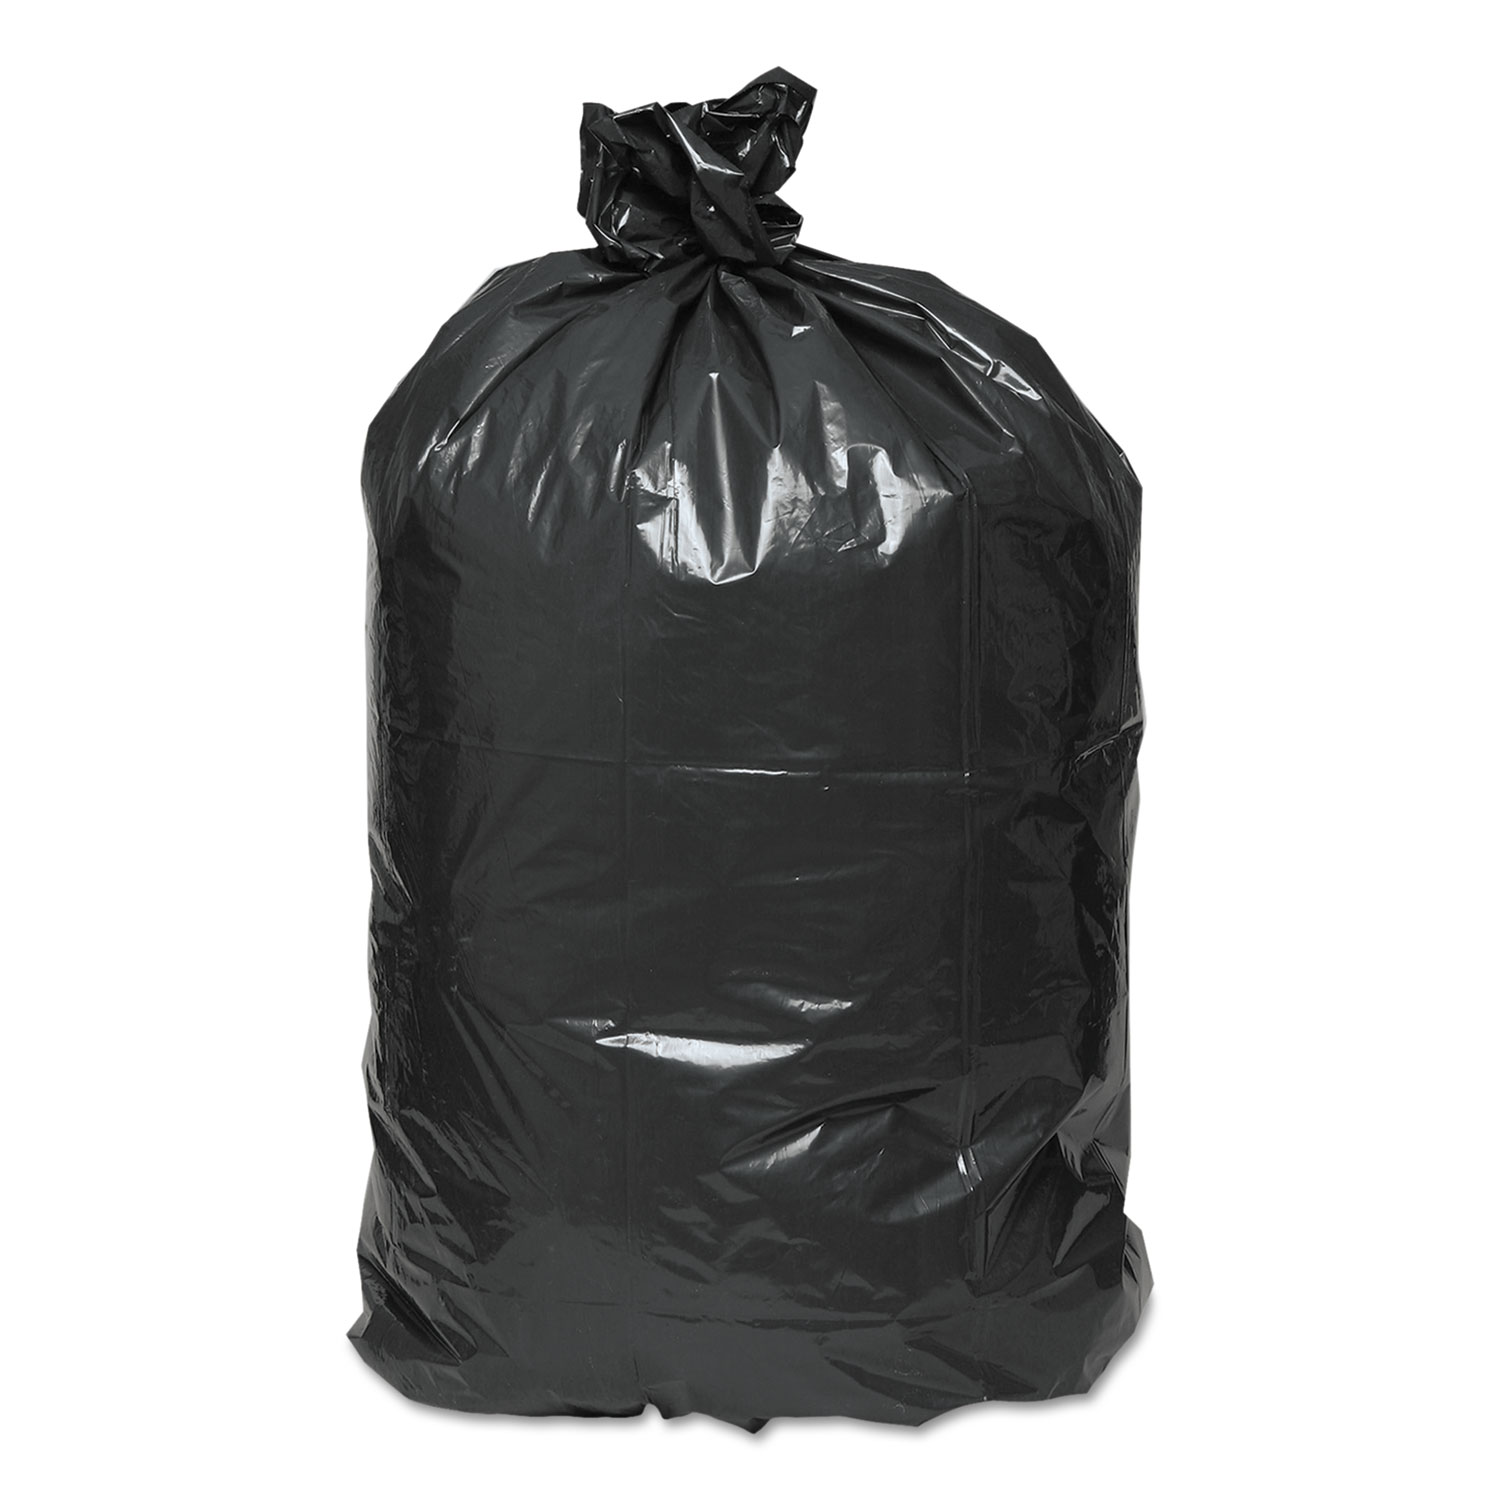 AMZ Supply Garbage Can Liners 30x36 Low Density Clear Trash Liners 0.9 Mil  20-30 Gallon Trash Bags Pack of 200 